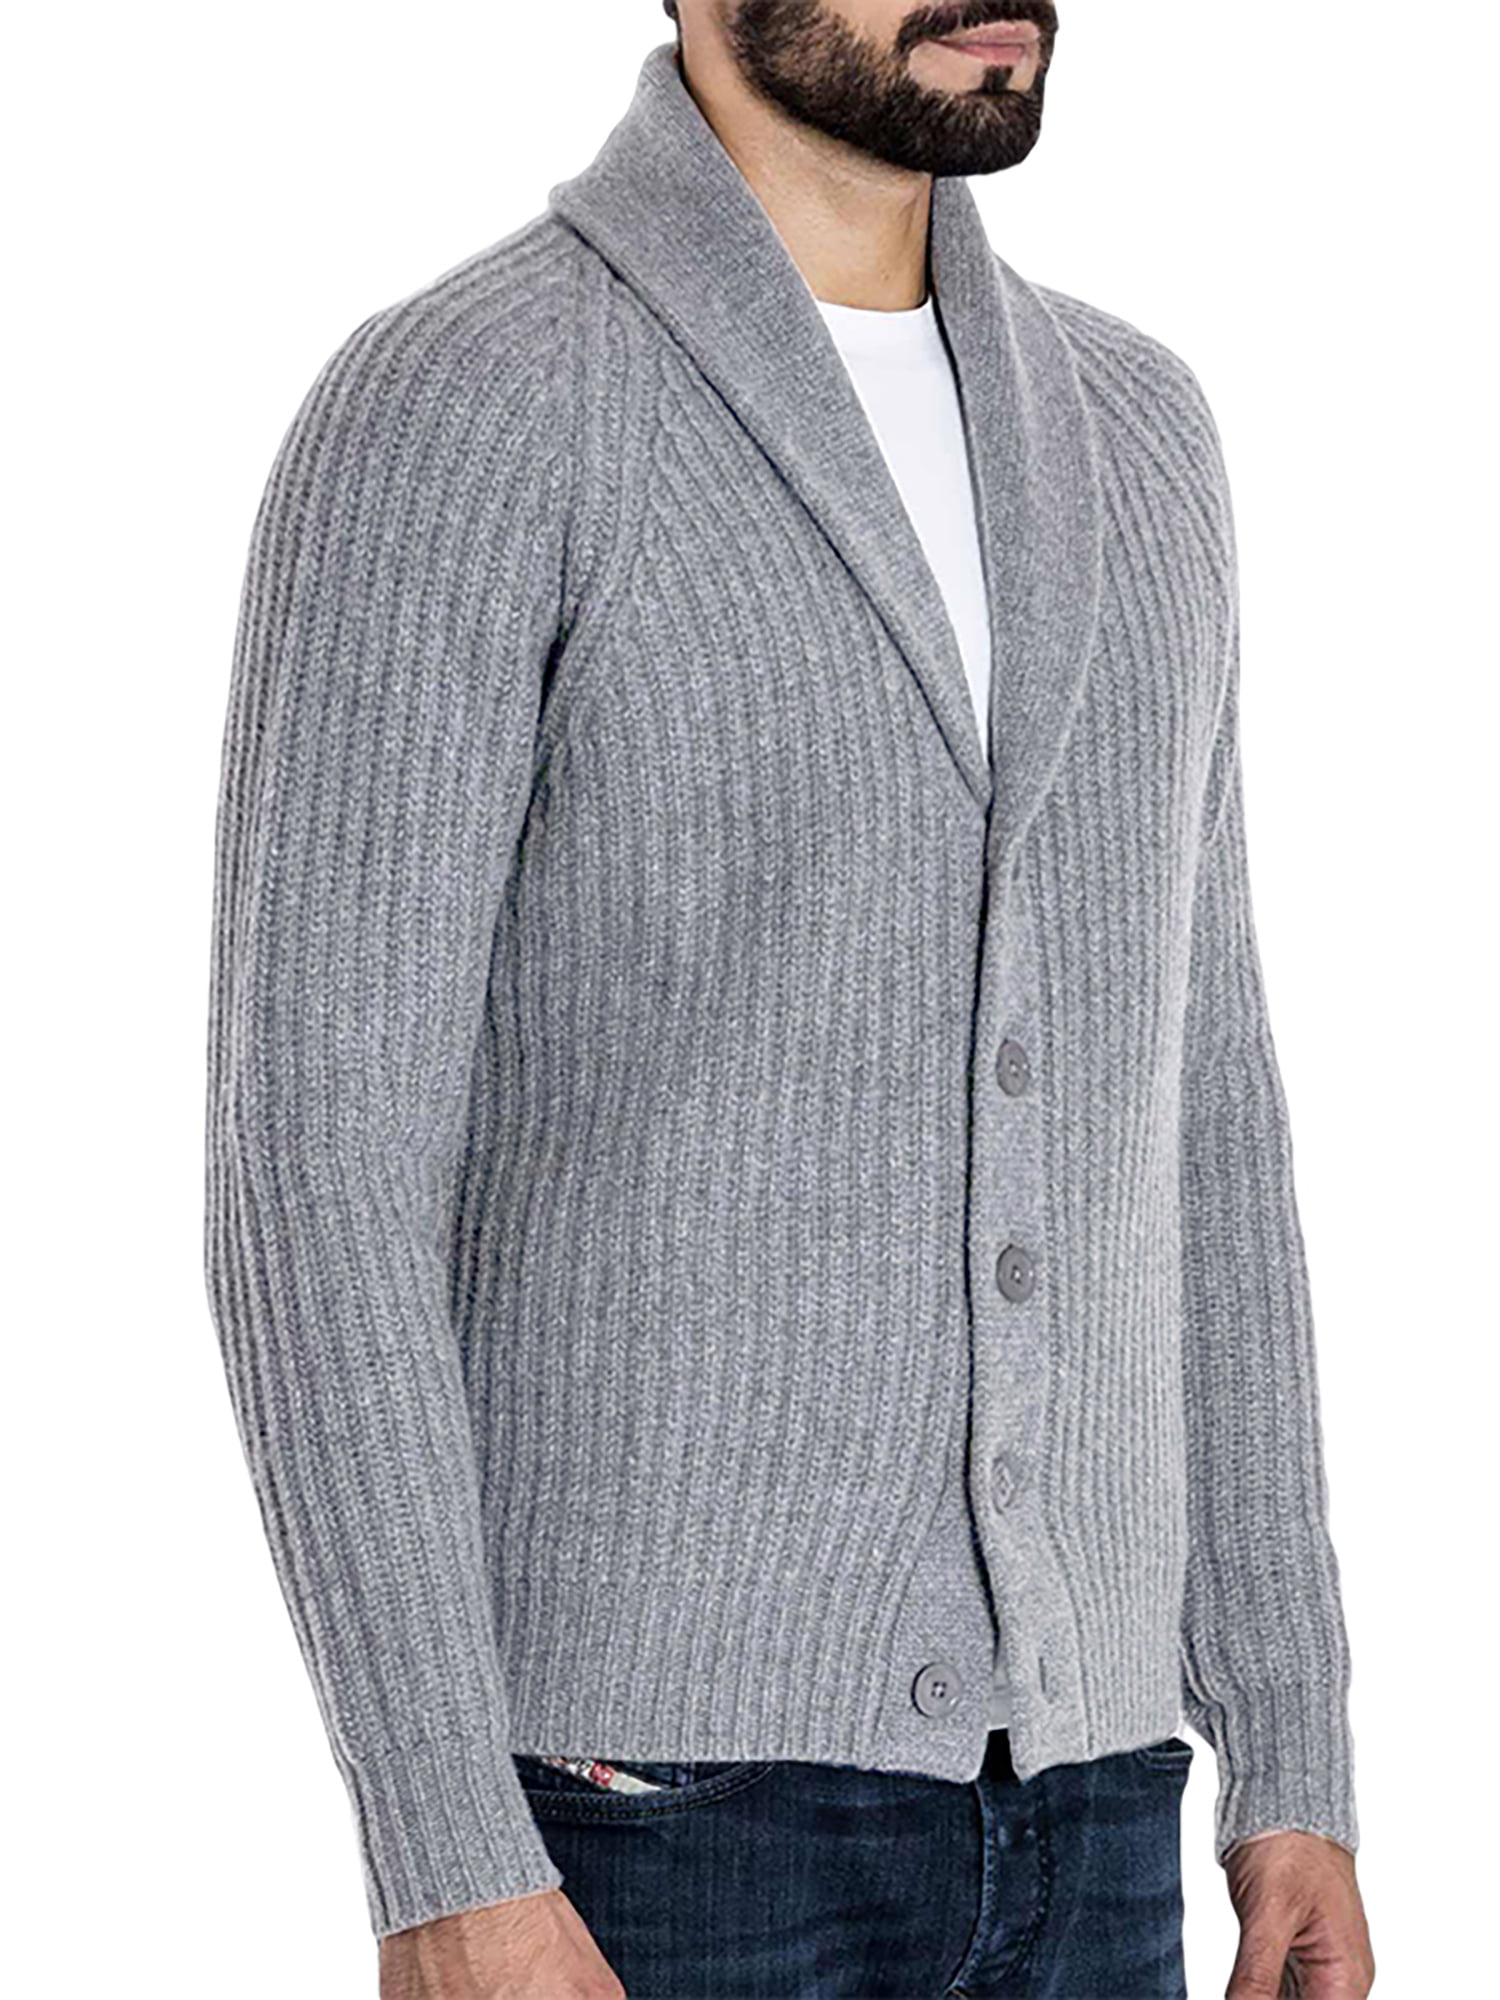 Generic Mens Fashion Shawl Collar Knitted Sweater Button Down Cardigan Sweater 